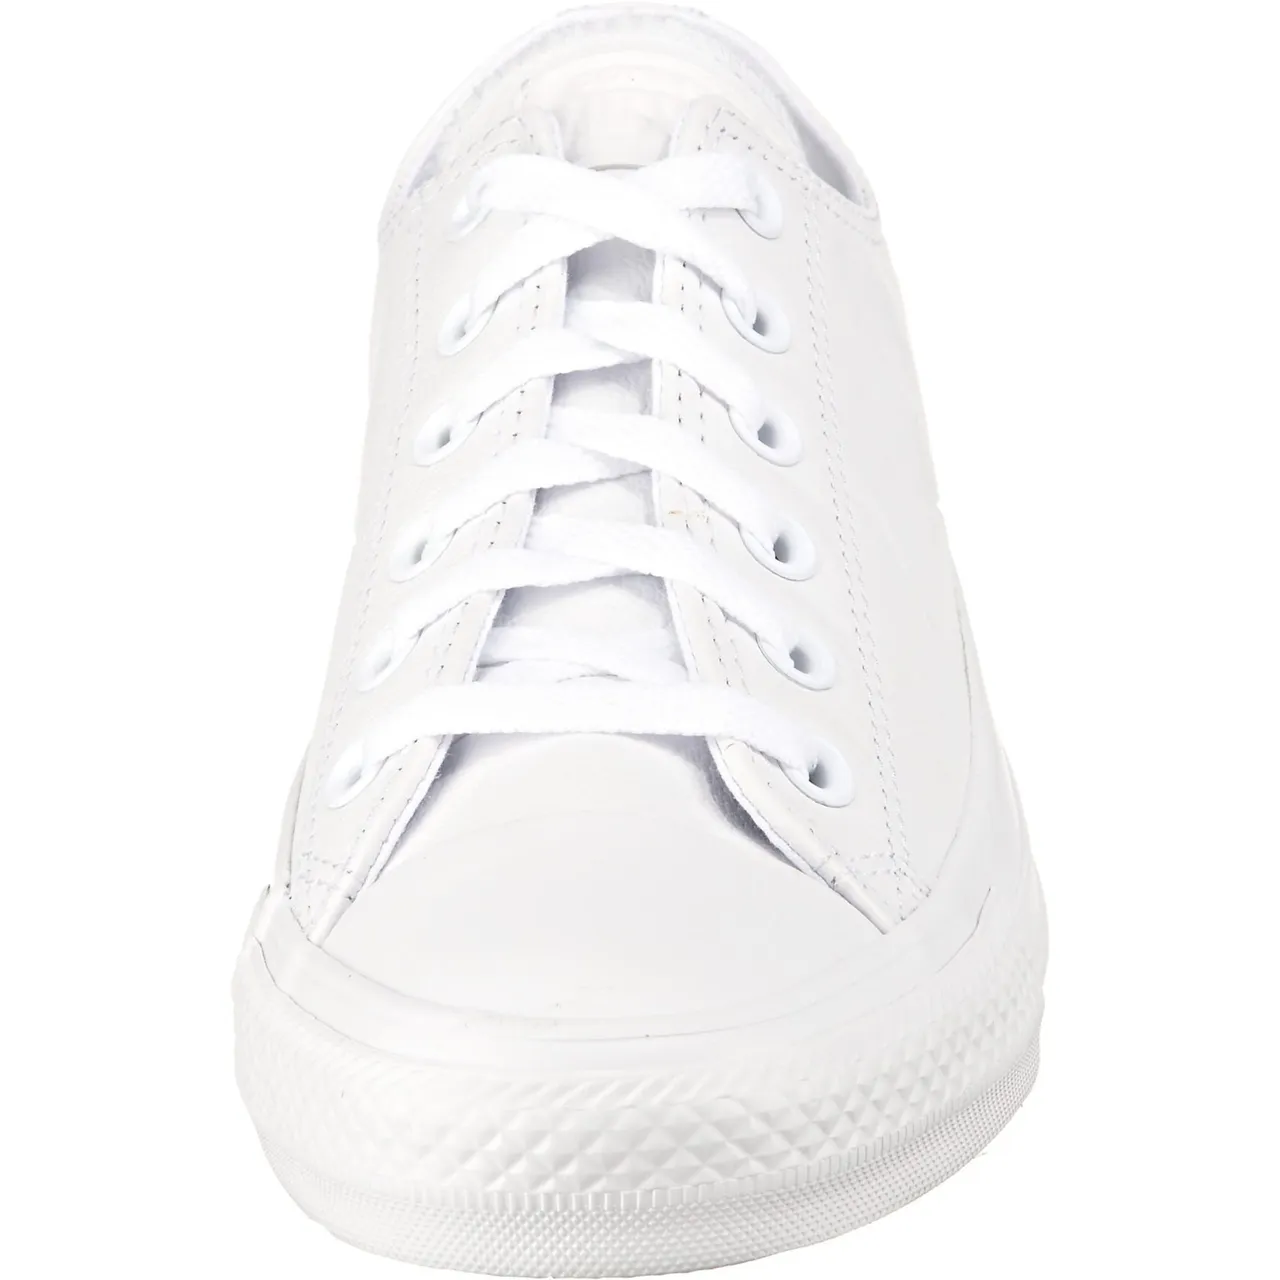 Sneakers laag 'Chuck Taylor All Star'